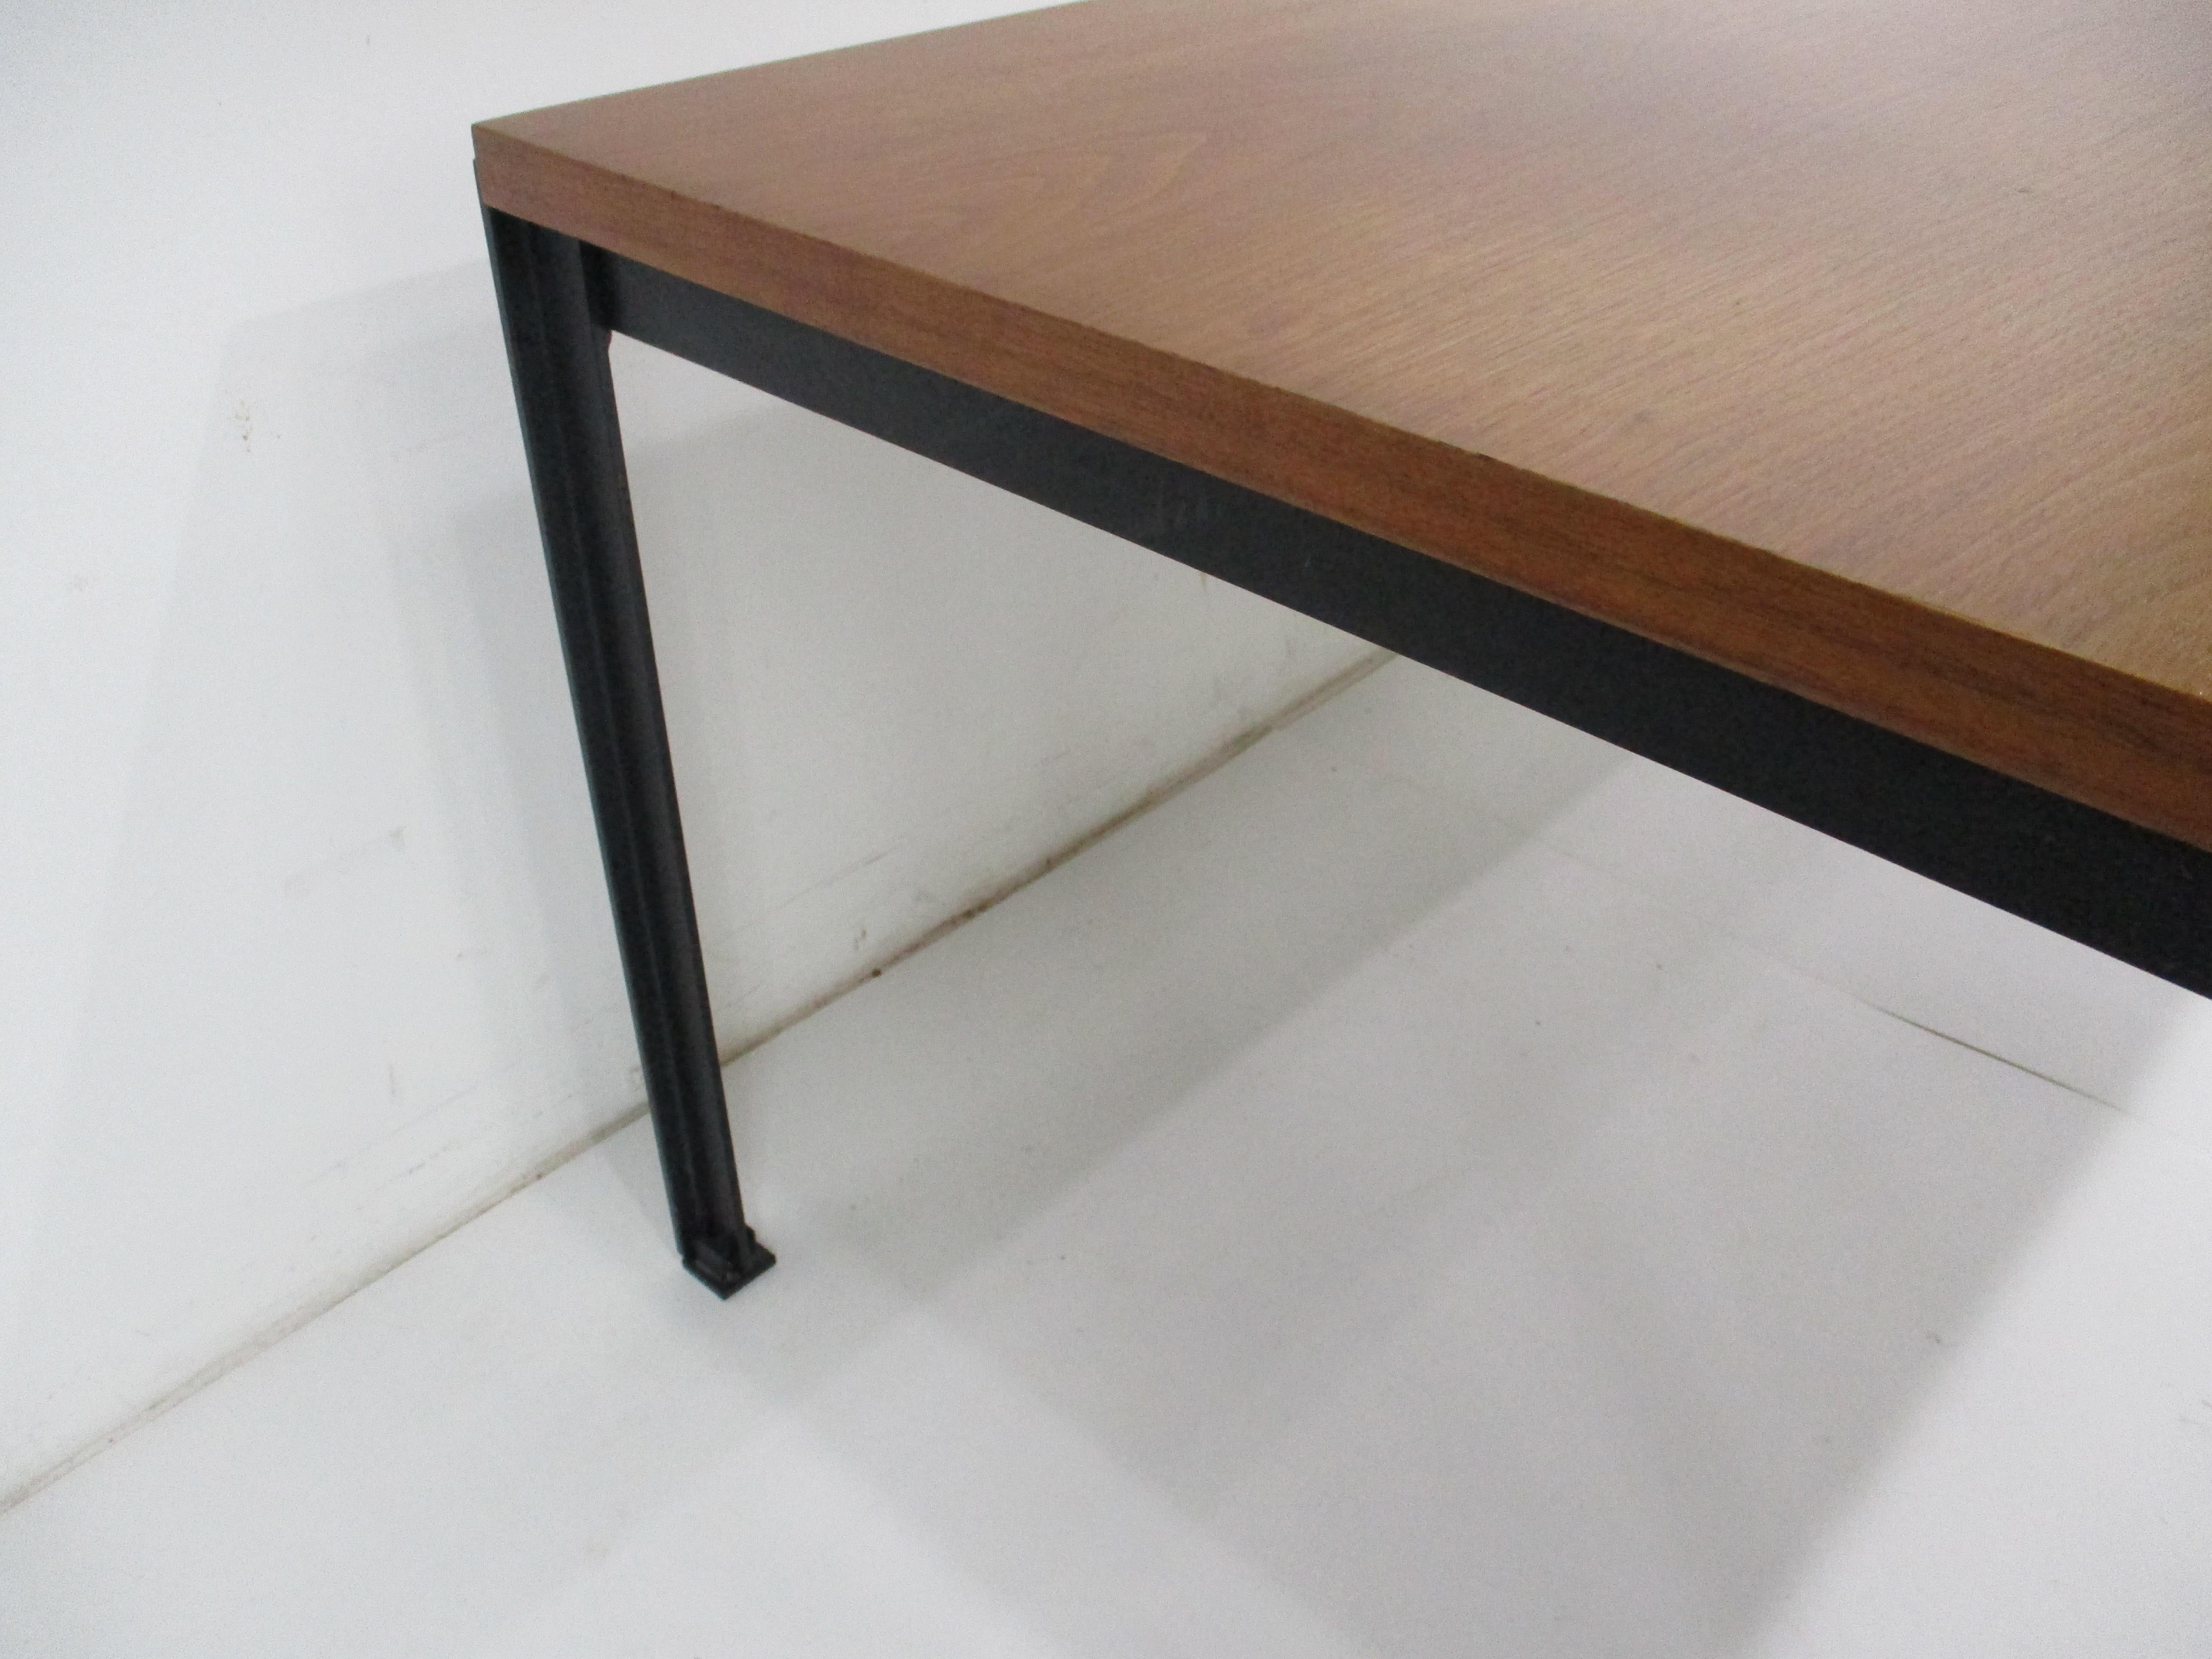 American Early T Angle Walnut Coffee Table / Bench by Florence Knoll # 332 for Knoll (B)  For Sale